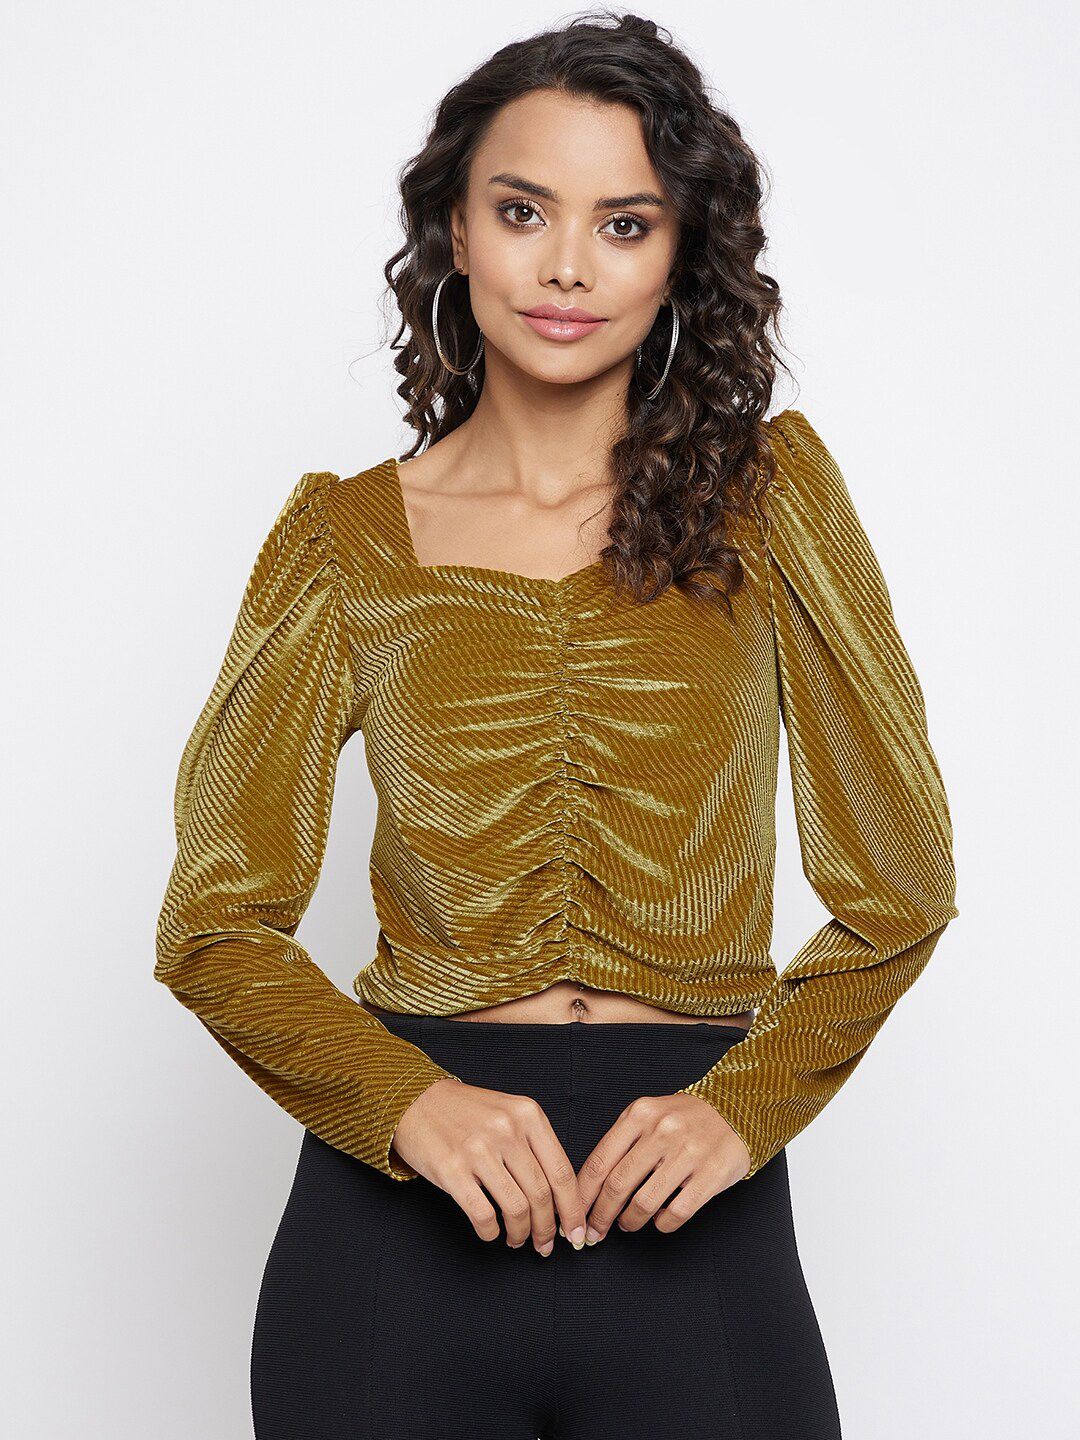 Madame Mustard Yellow Sweetheart Neck Crop Top Price in India